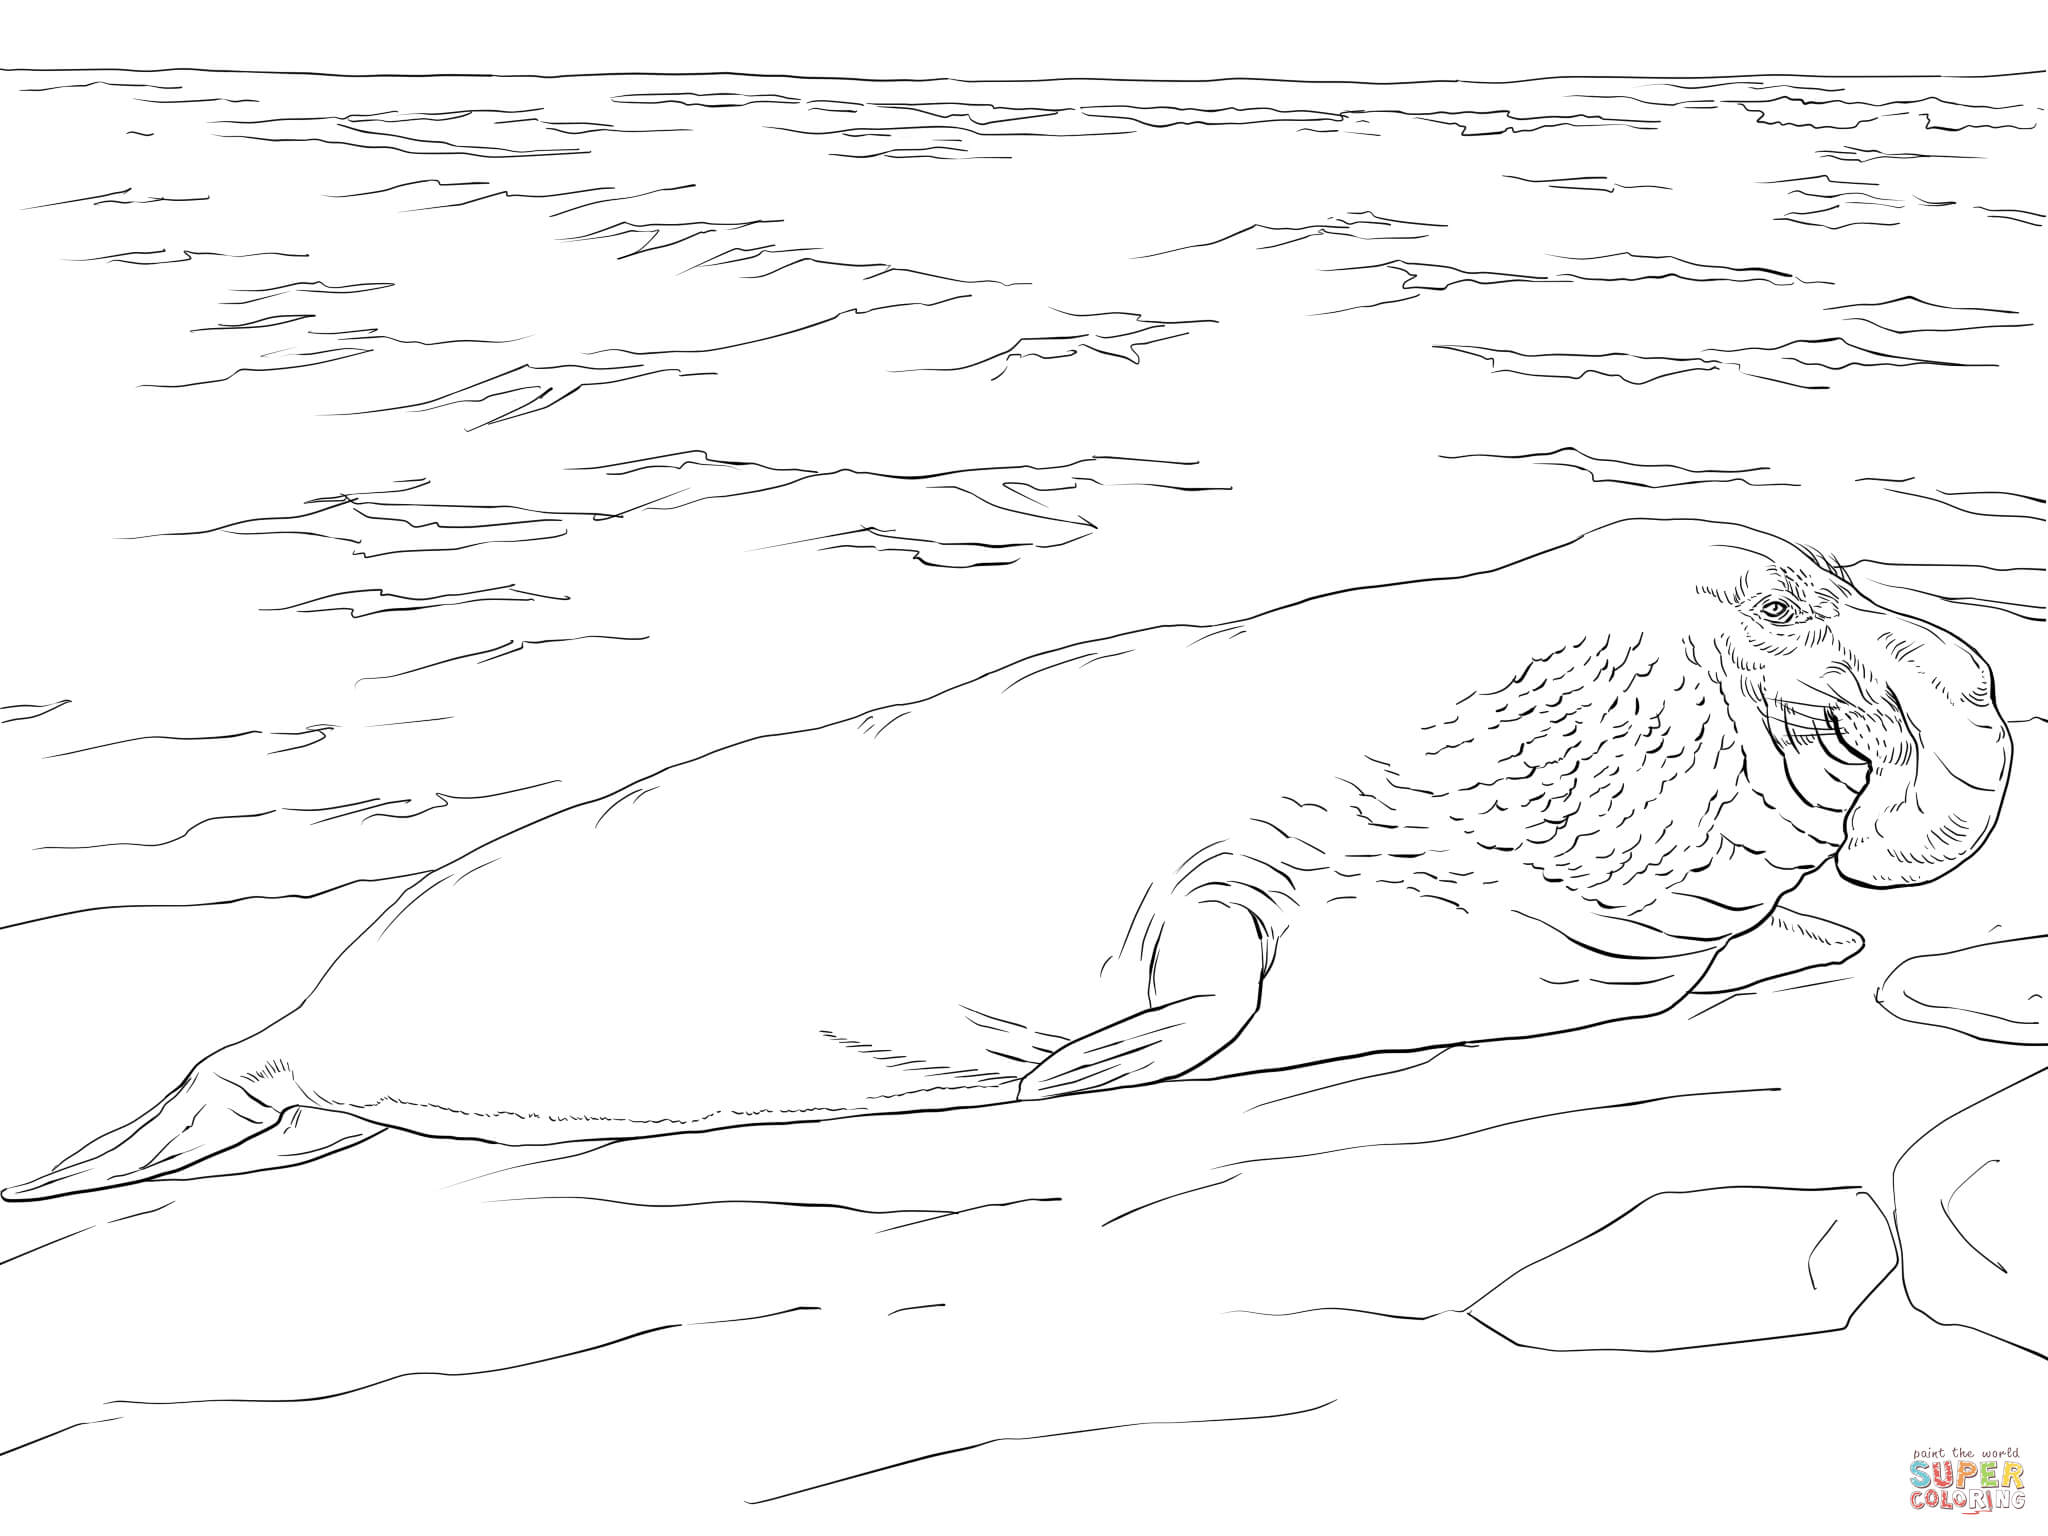 Elephant Seal on the Shore coloring page